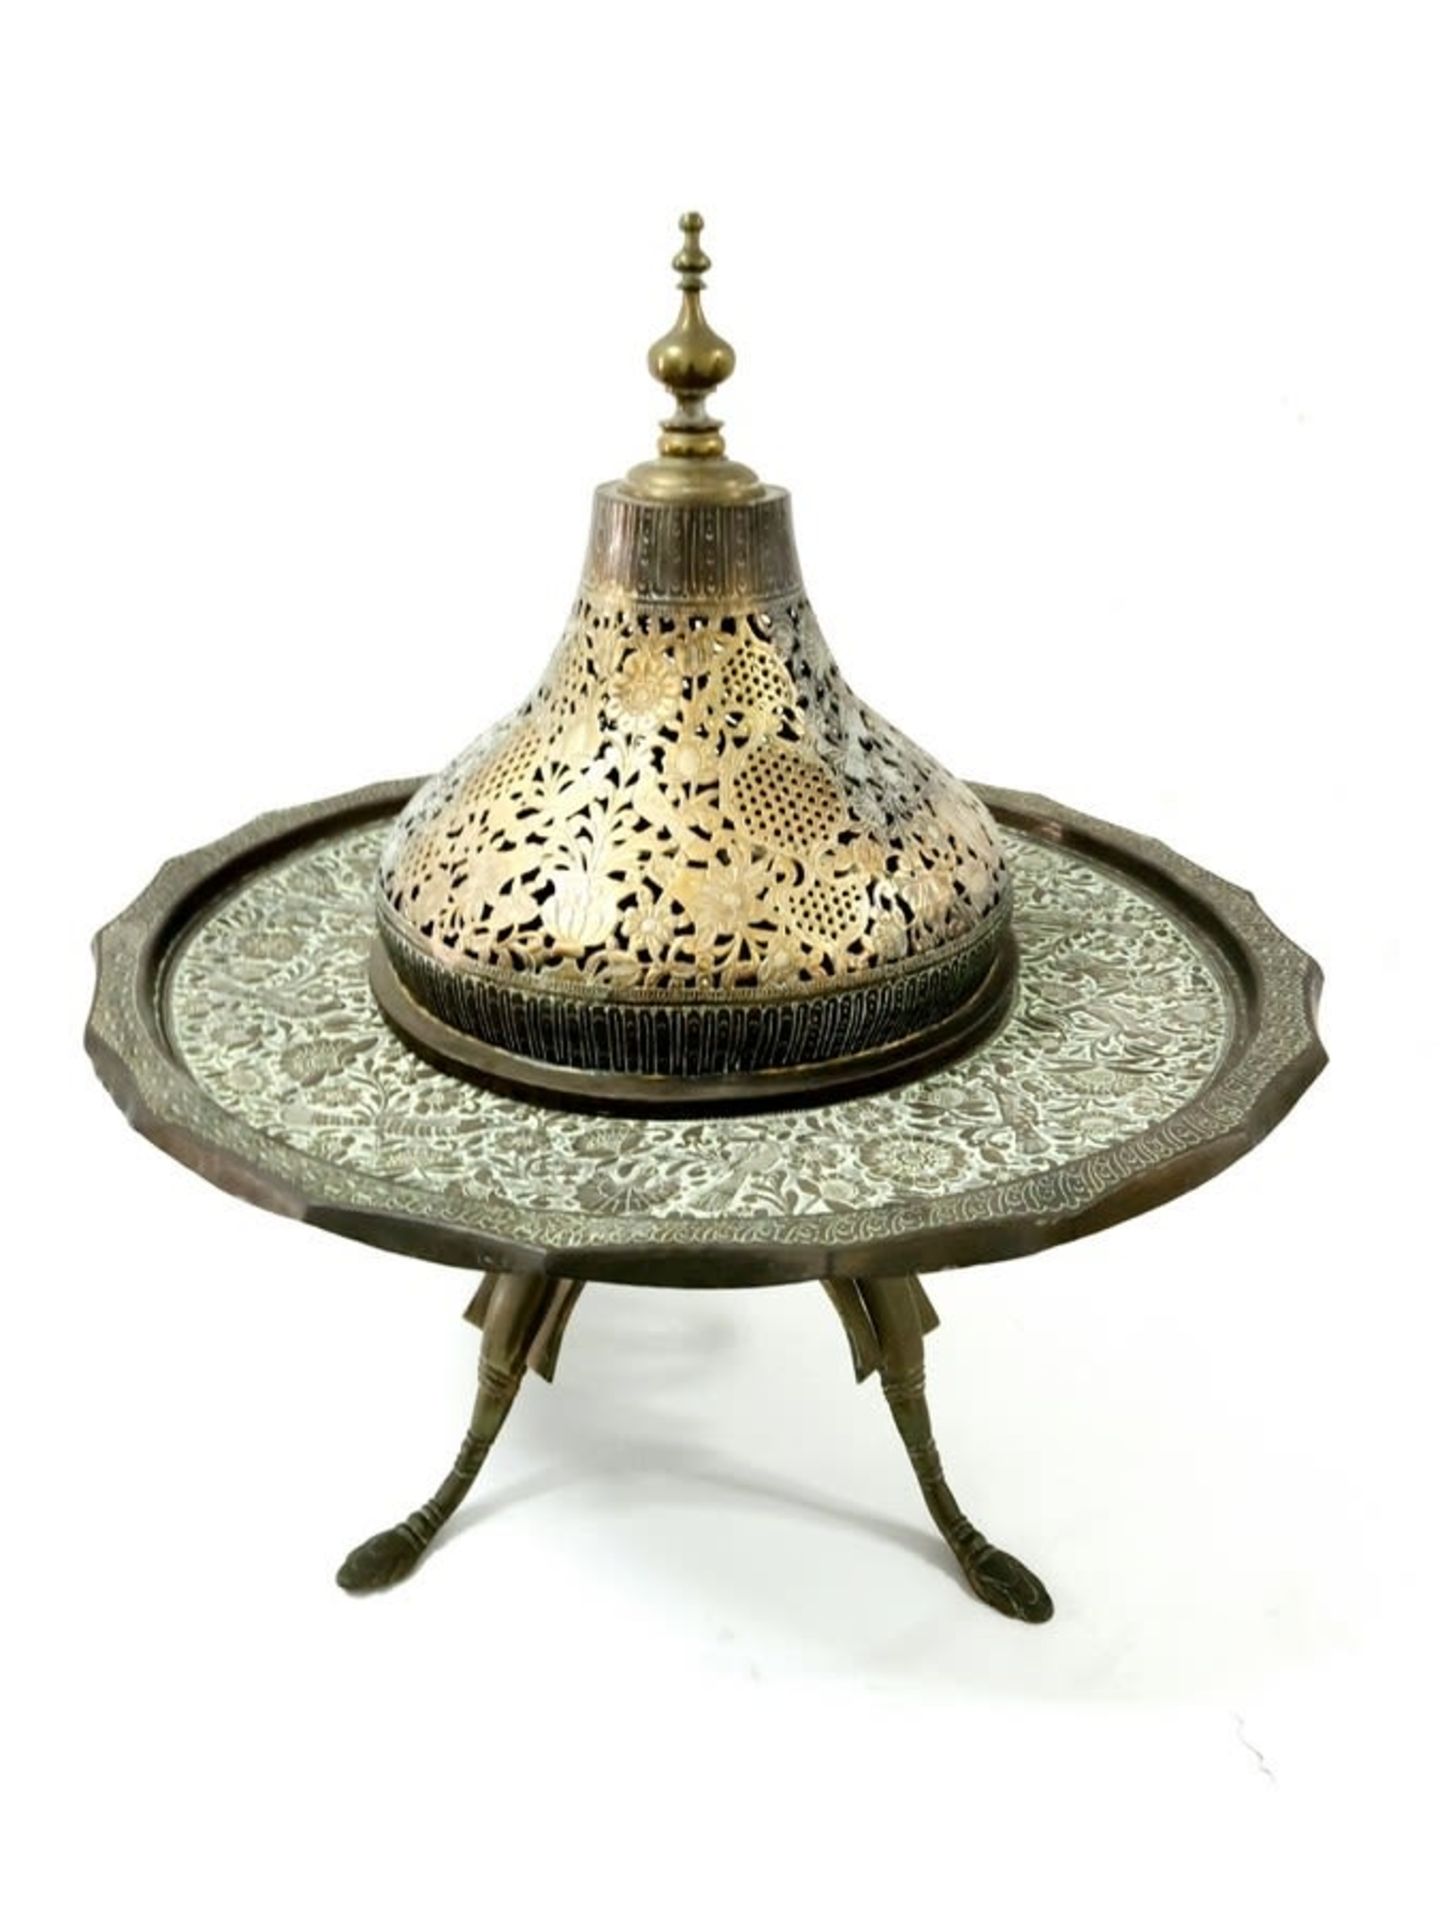 Impressive and high-quality antique Ottoman Turkish brazier, made of hammered and engraved sawn - Bild 2 aus 8